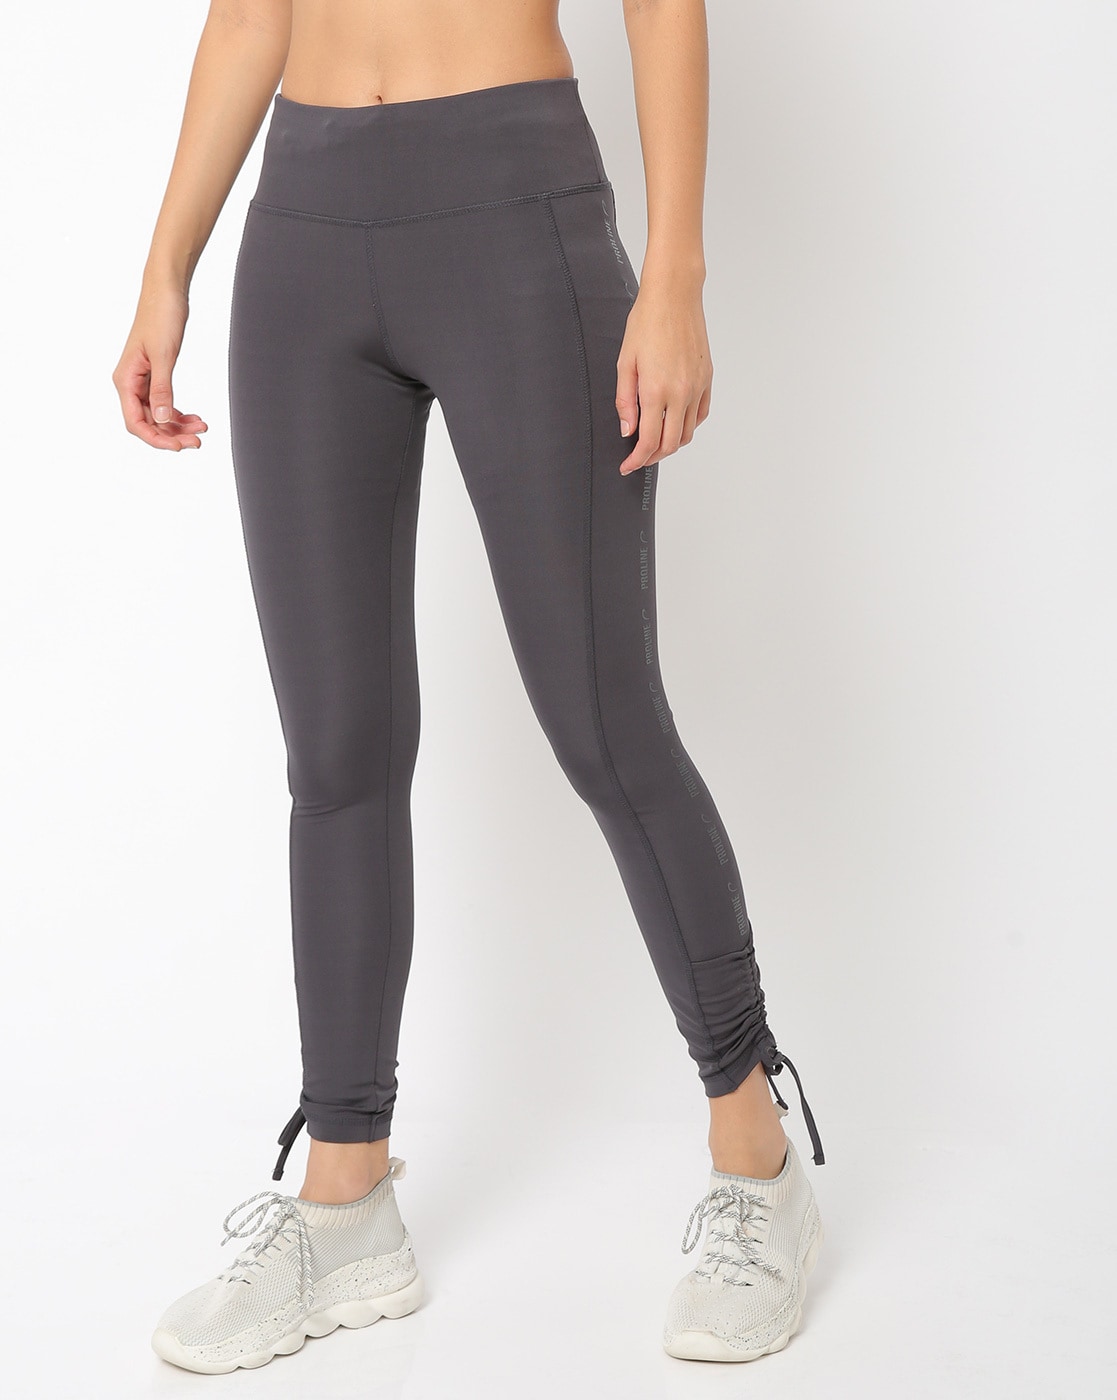 Five Outfits with Dark Grey Leggings to Copy for Athleisure and Activewear